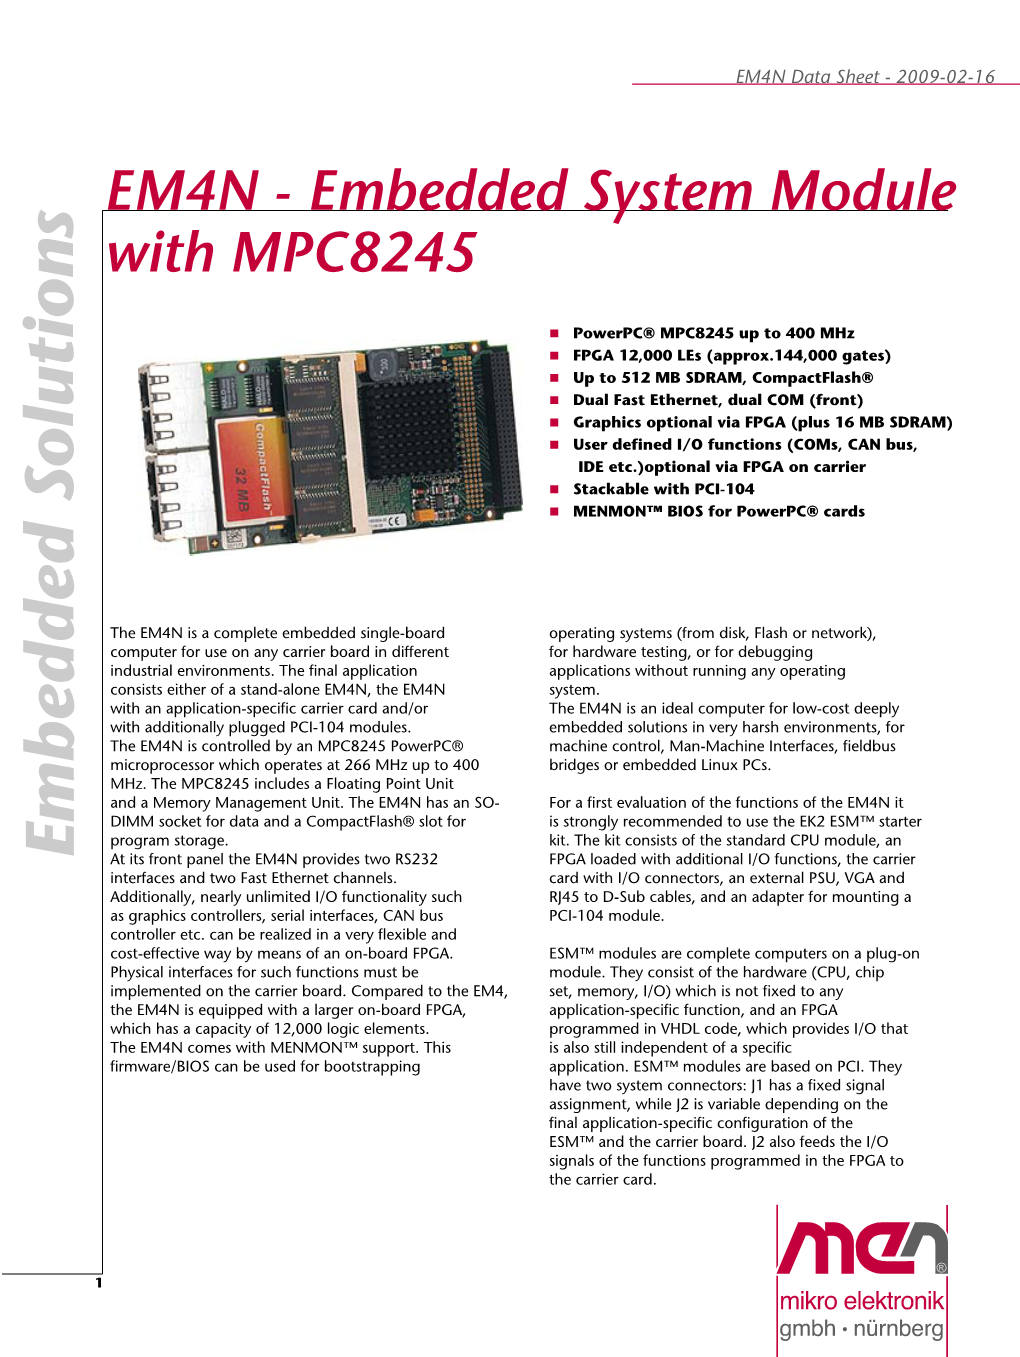 Embedded System Module with MPC8245